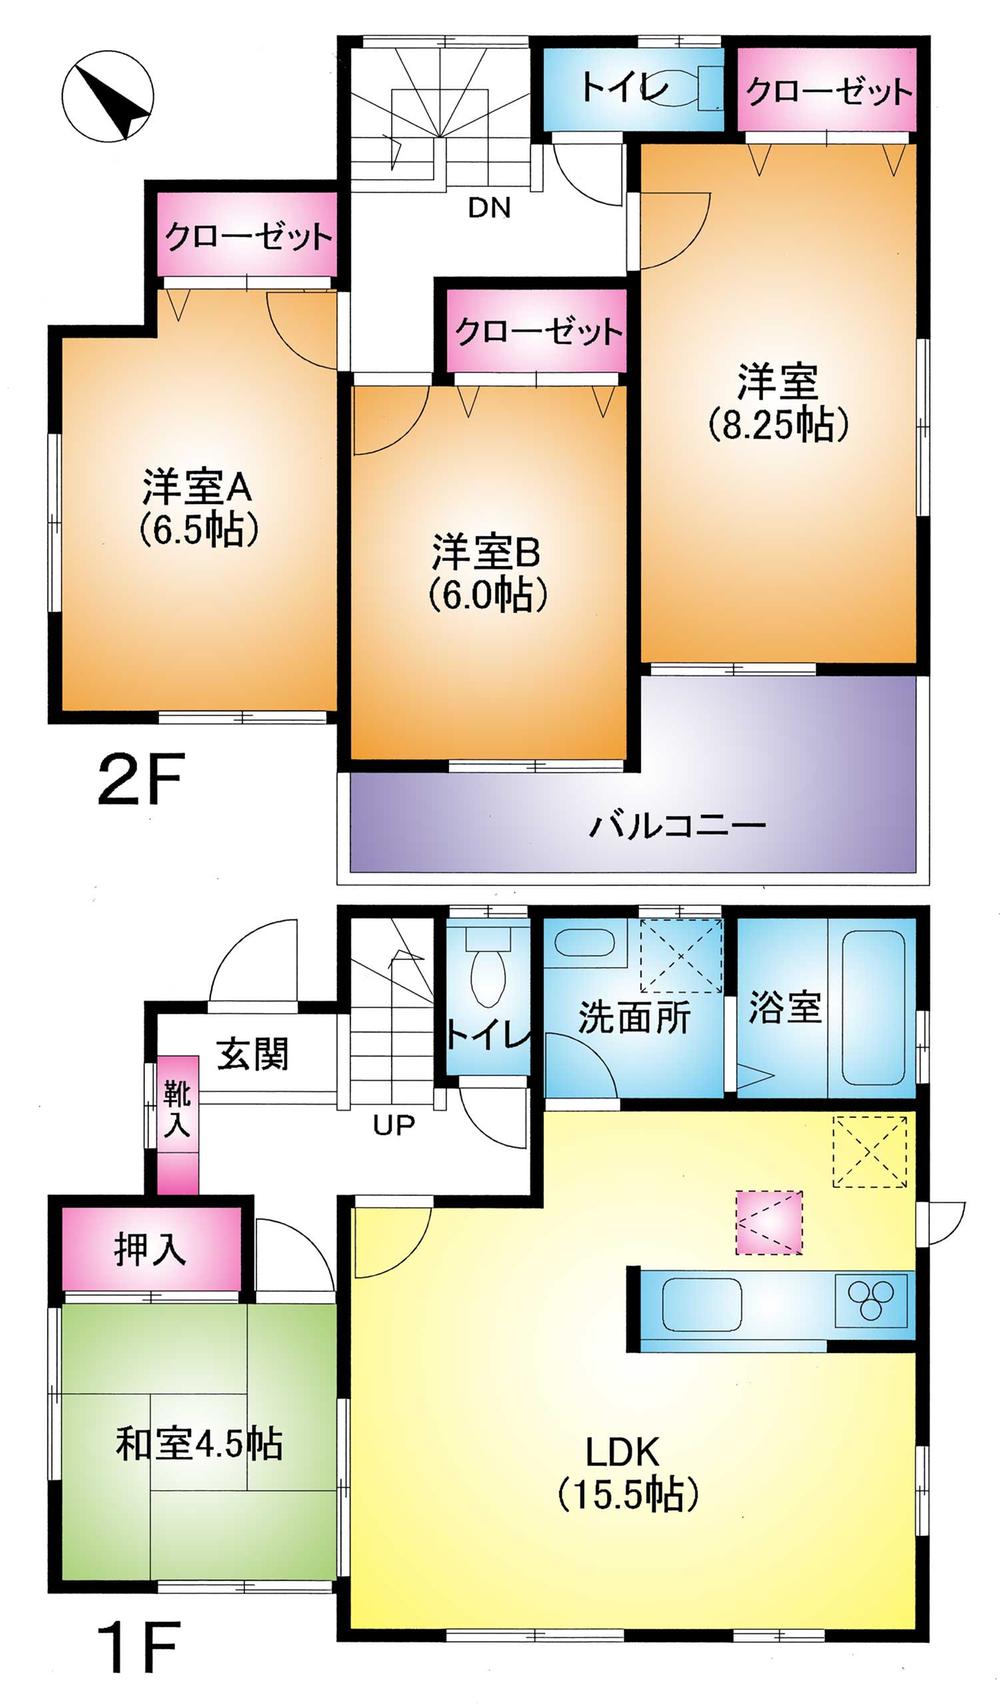 Floor plan. 29,800,000 yen, 4LDK, Land area 97.89 sq m , Building area 97.71 sq m all the living room facing south !! all room housed Yes !!